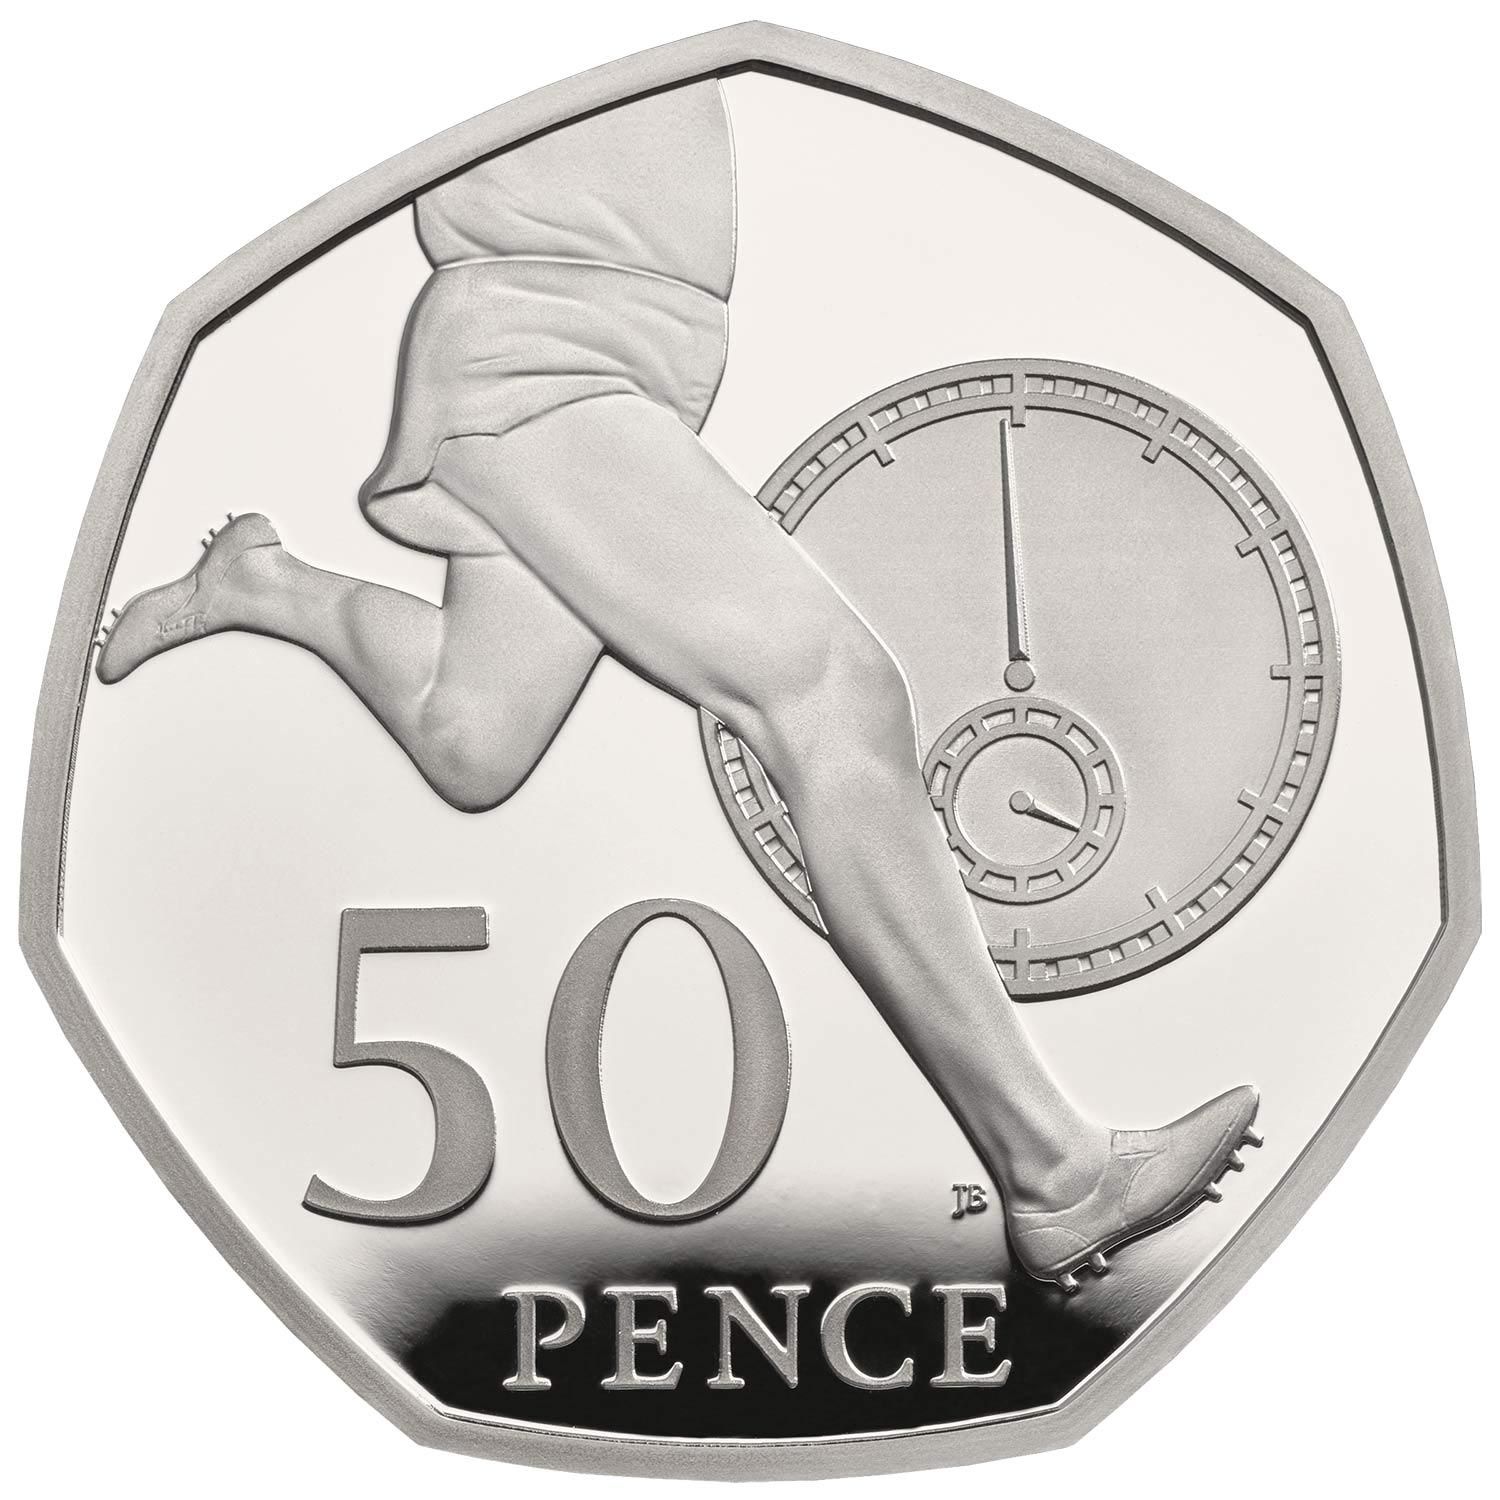 Image of 50 pence coin - 50th Anniversary of the first four-minute mile by Roger Bannister | United Kingdom 2004.  The Copper–Nickel (CuNi) coin is of UNC quality.